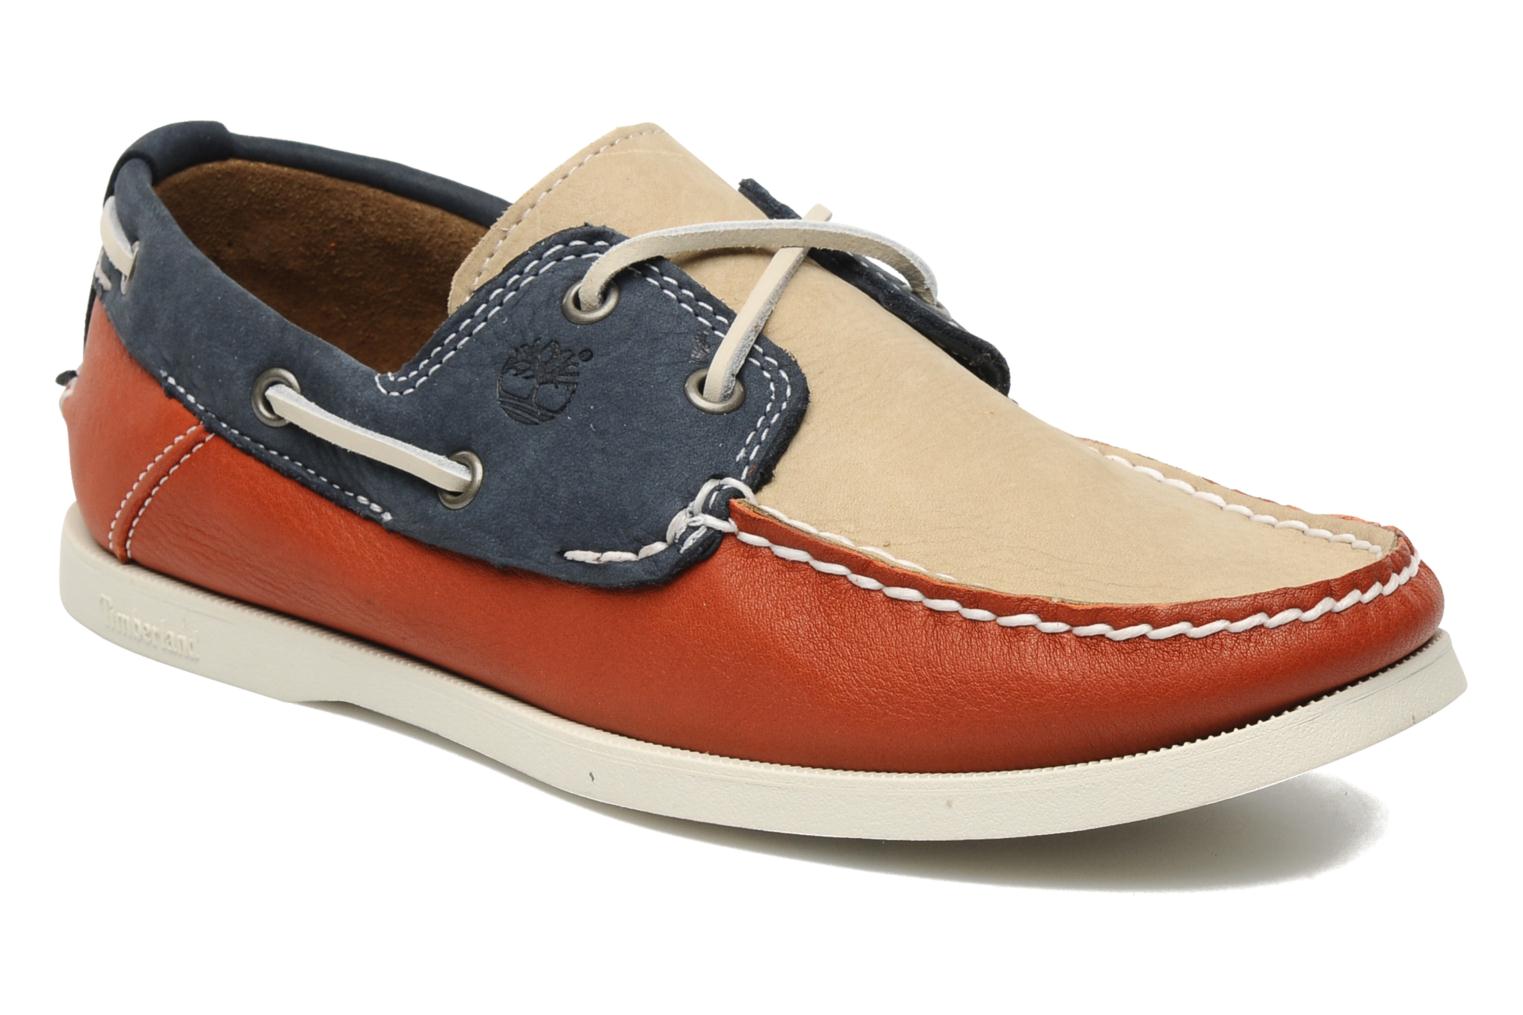 Foto Náuticos Timberland Earthkeepers Heritage Boat 2 Eye Hombre foto 432846